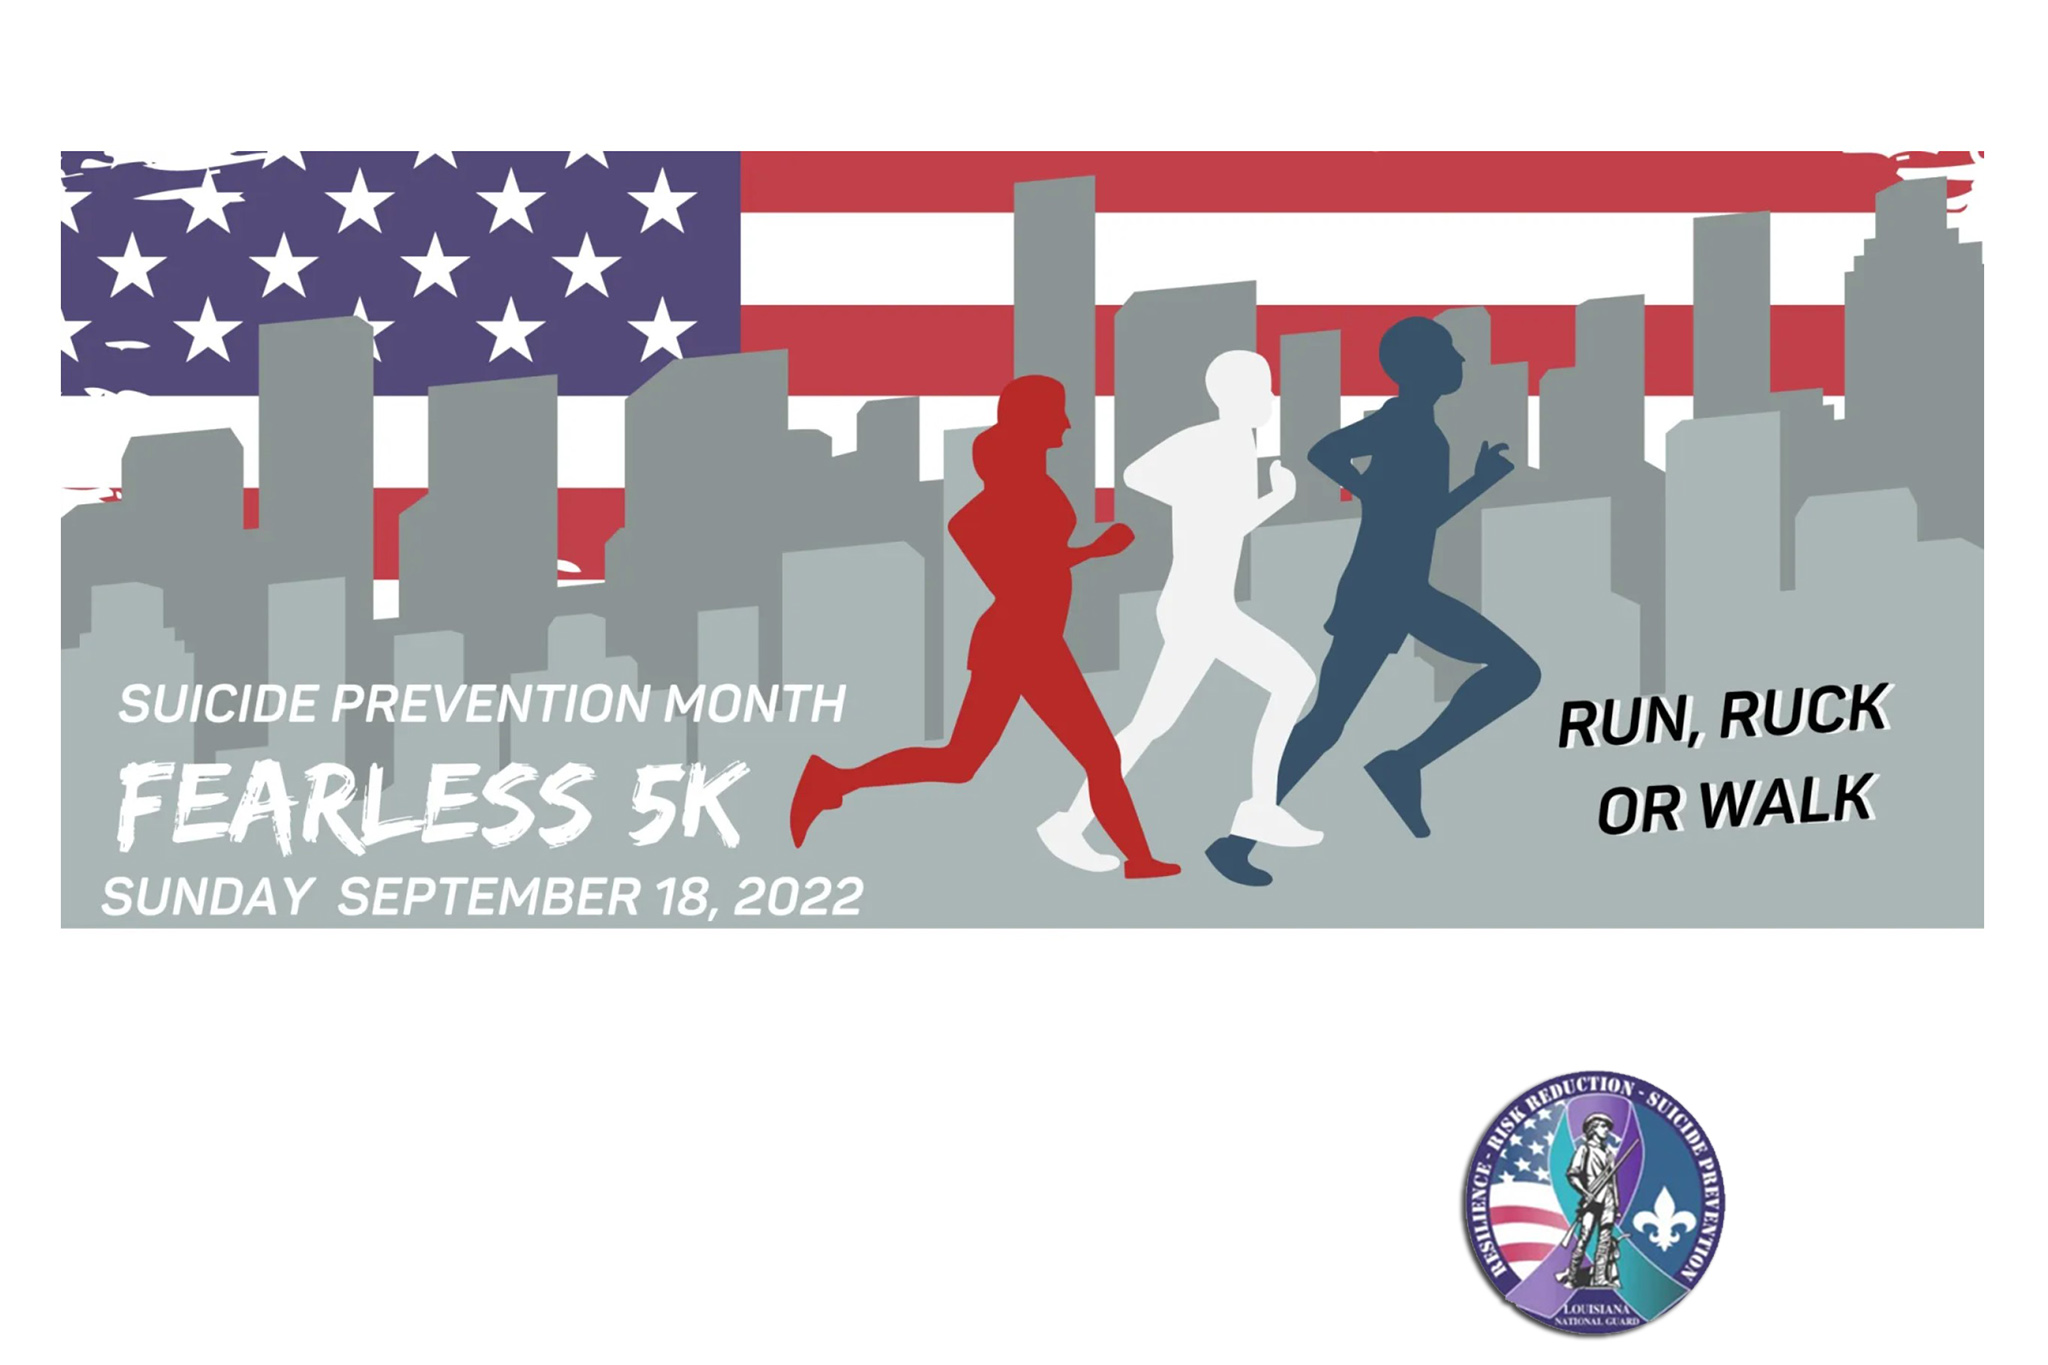 Suicide Prevention Month: FEARLESS 5K